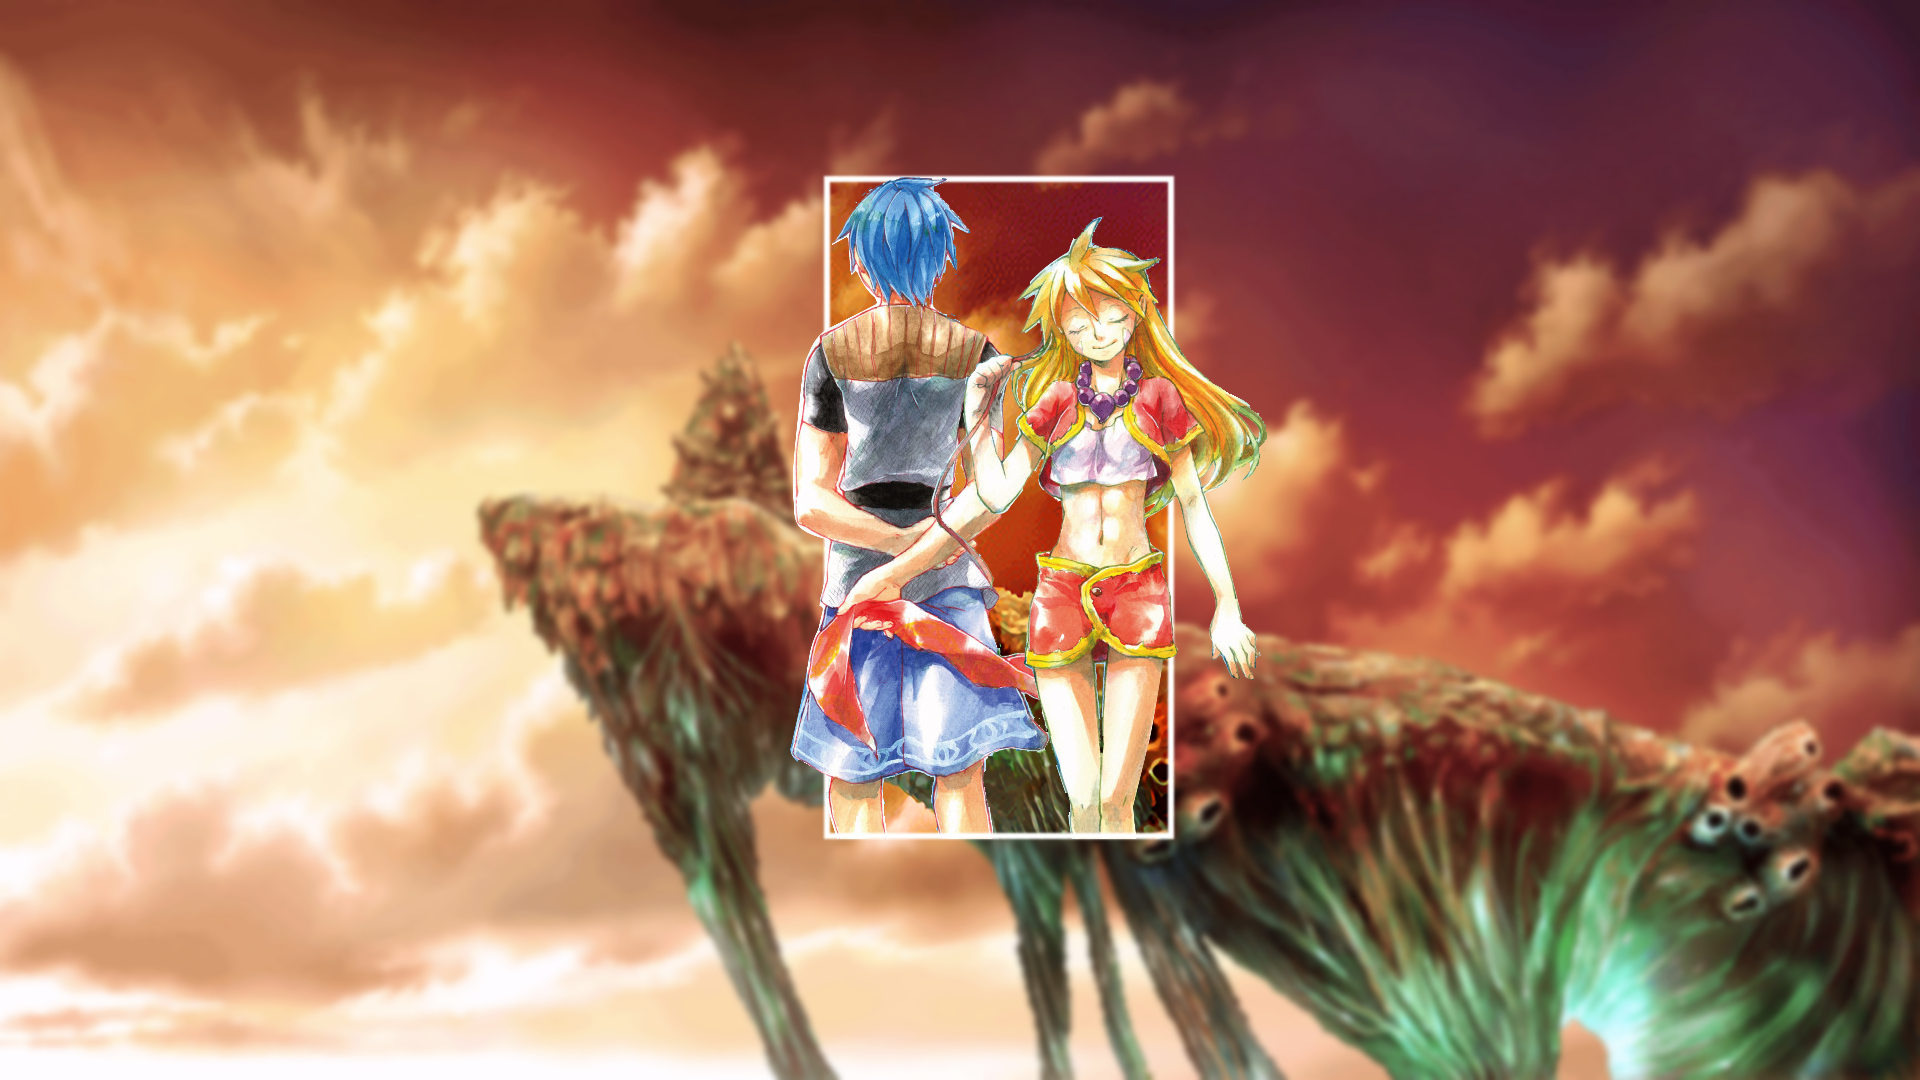 Anime 1920x1080 Chrono Cross video game art video games picture-in-picture